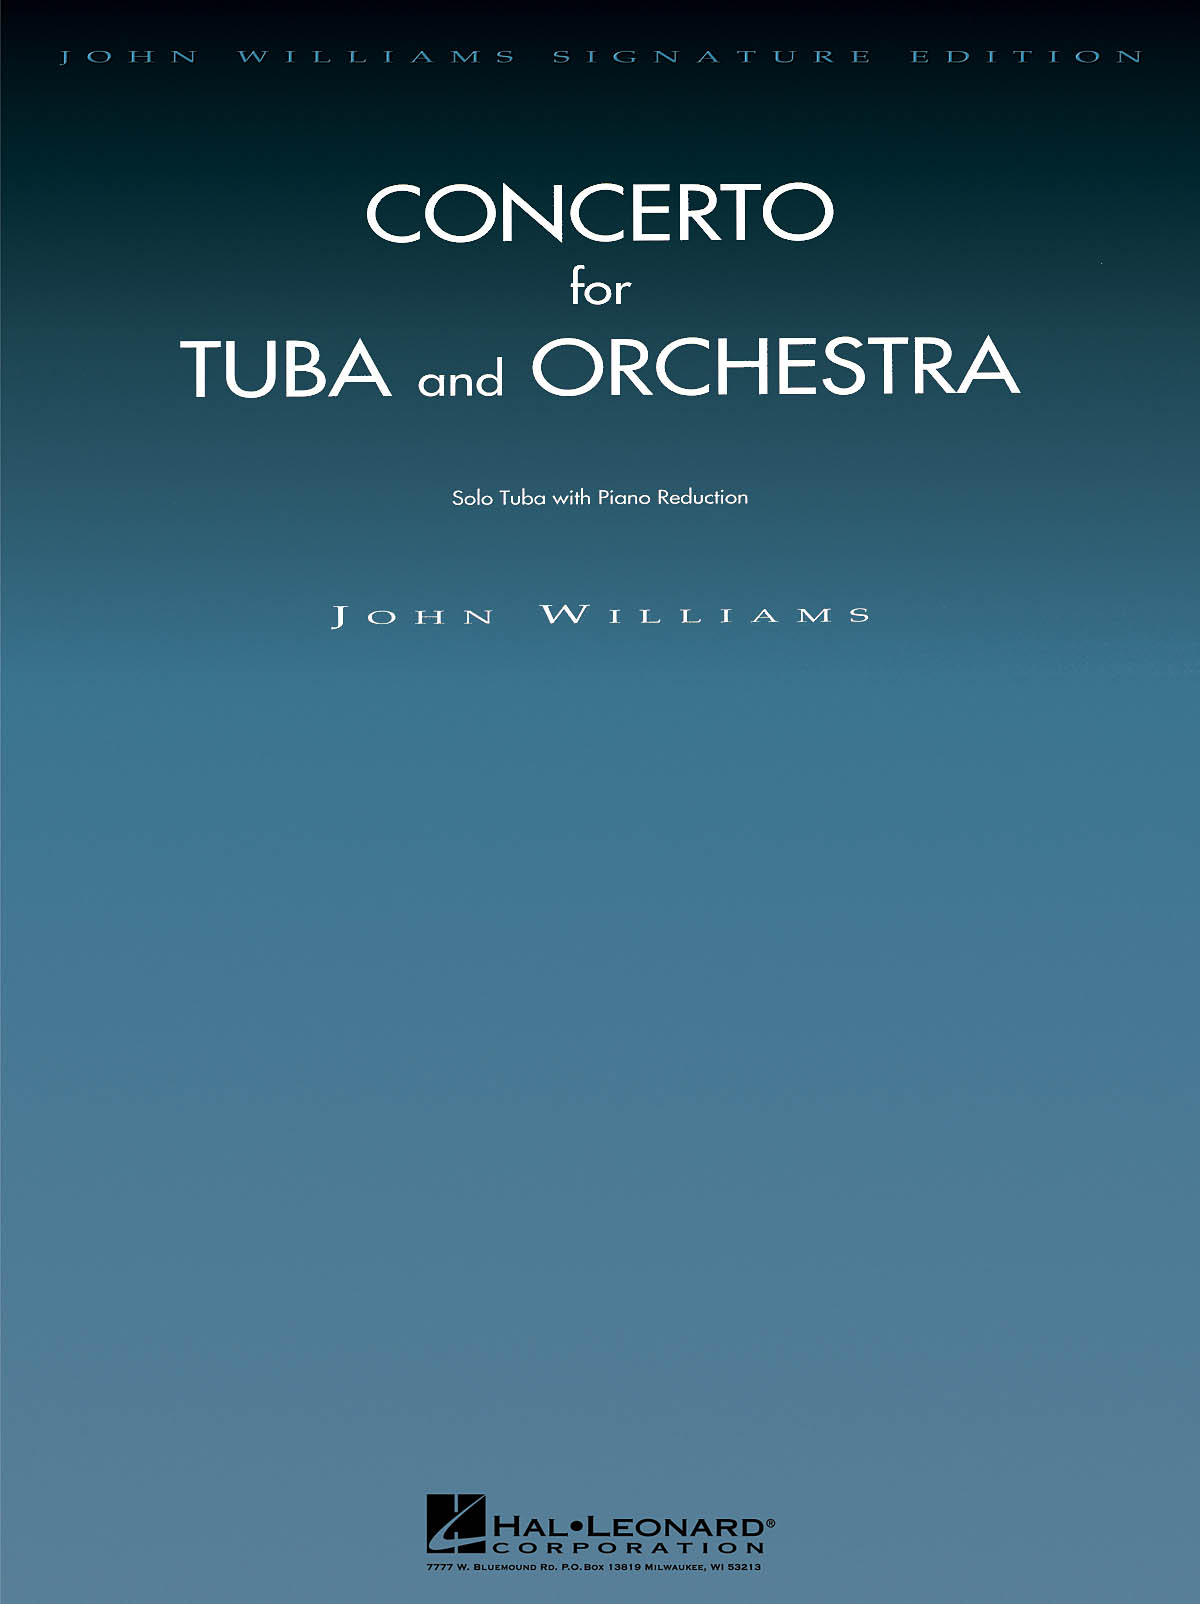 Concerto for Tuba and Orchestra - Tuba with Piano Reduction - noty pro tubu